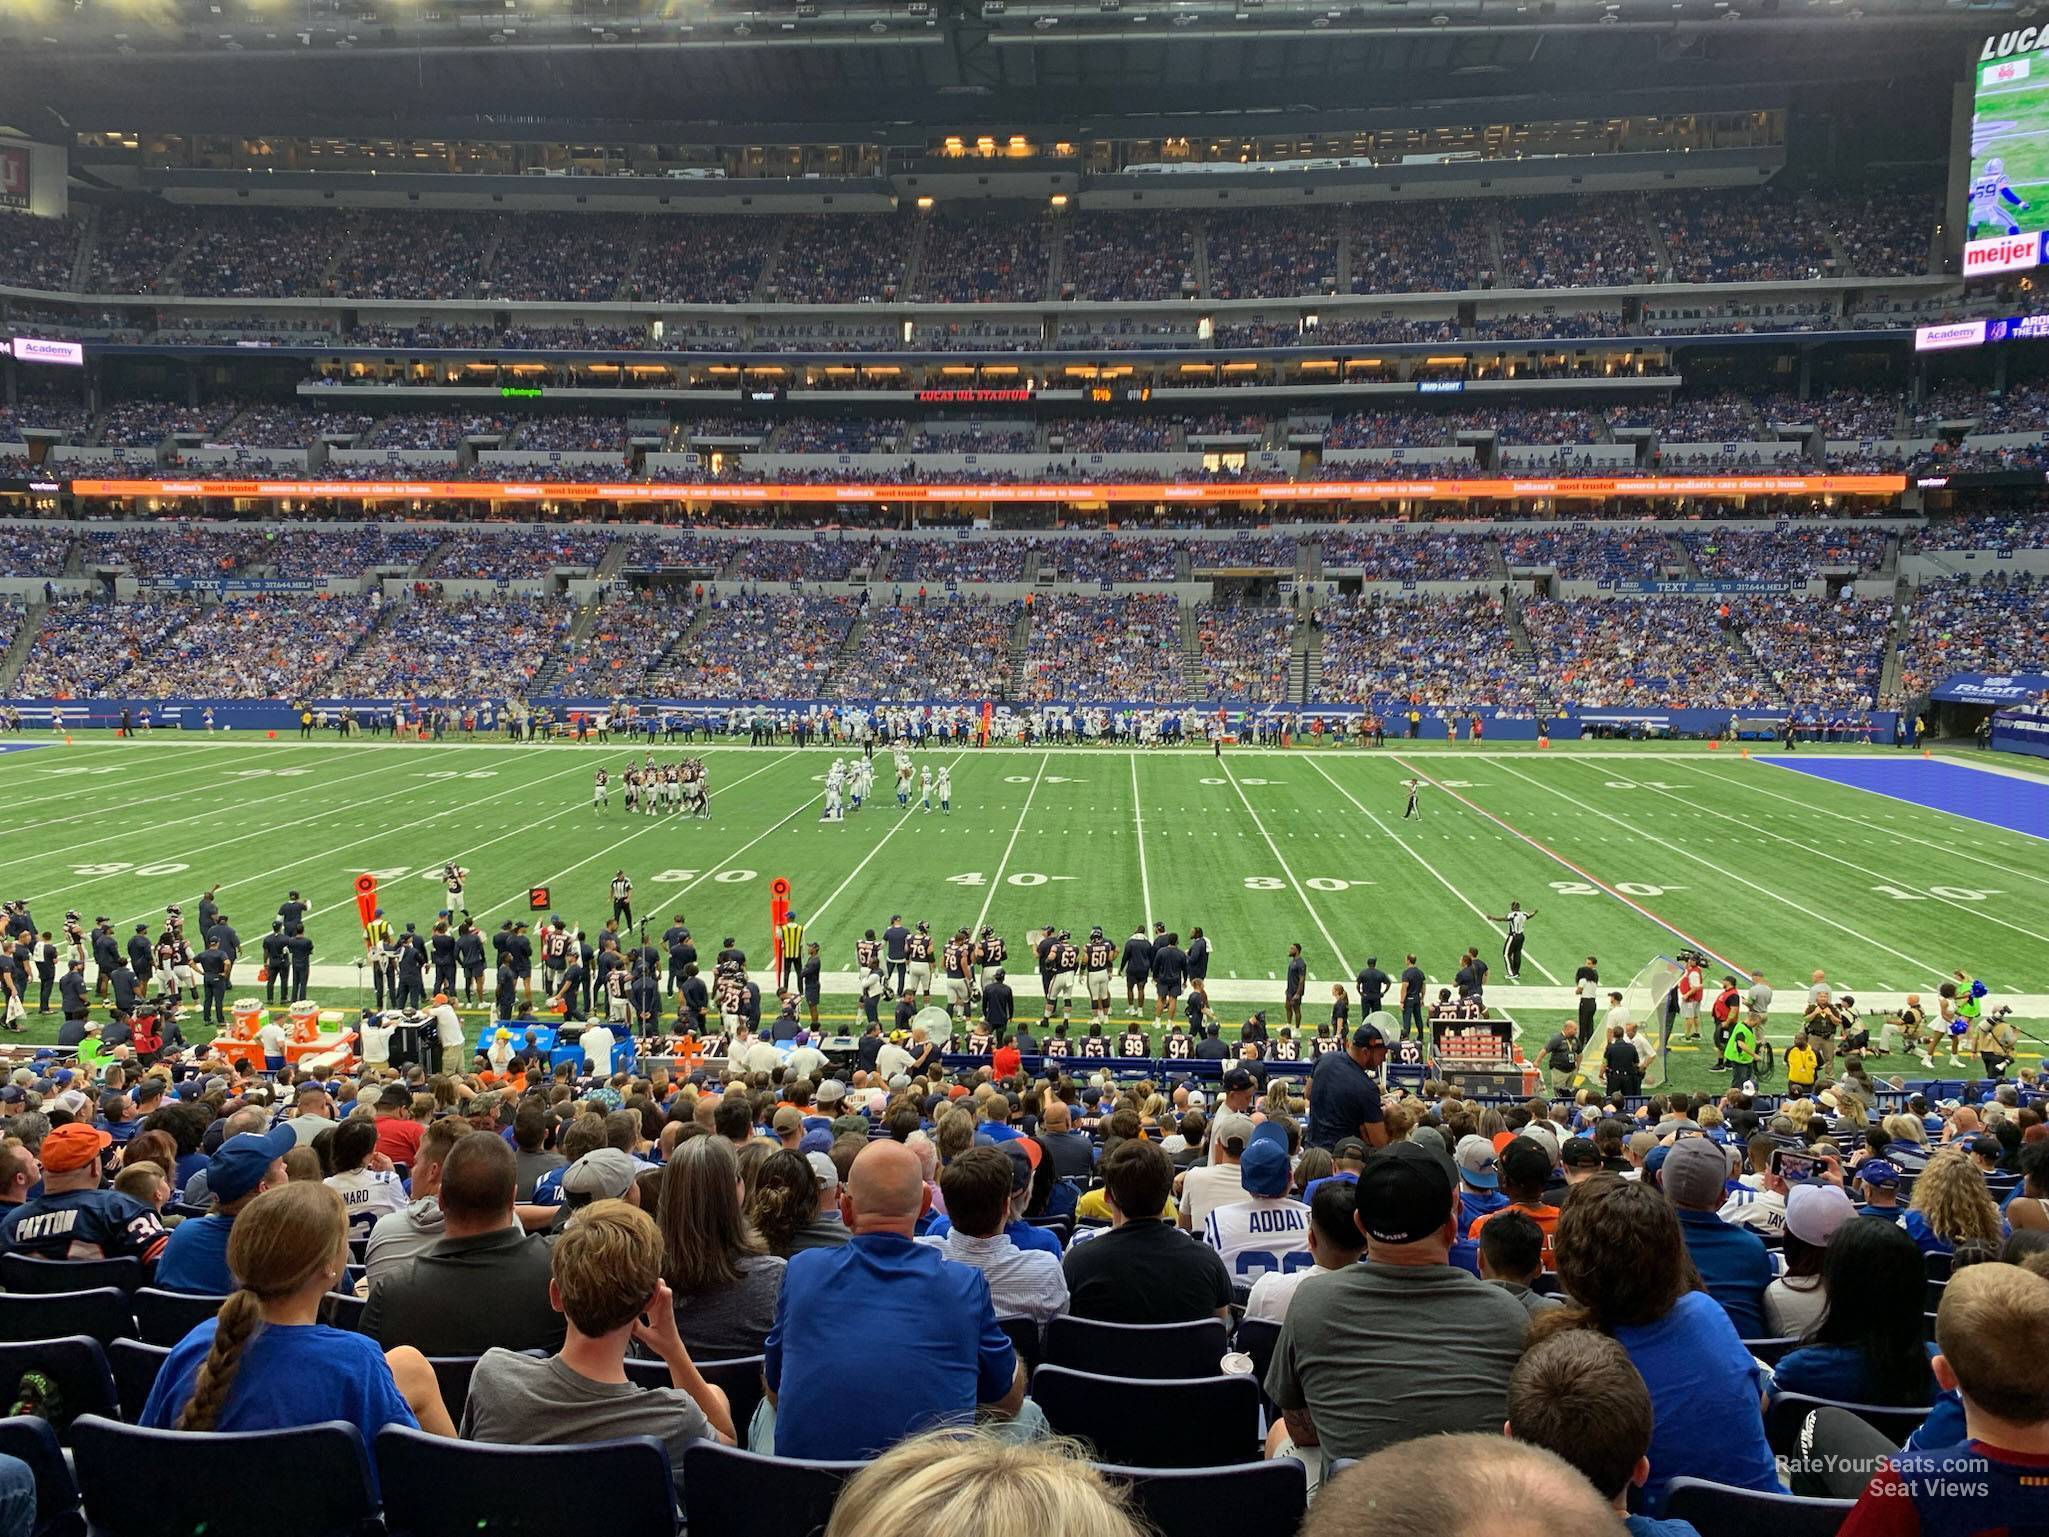 section 112, row 24 seat view  for football - lucas oil stadium